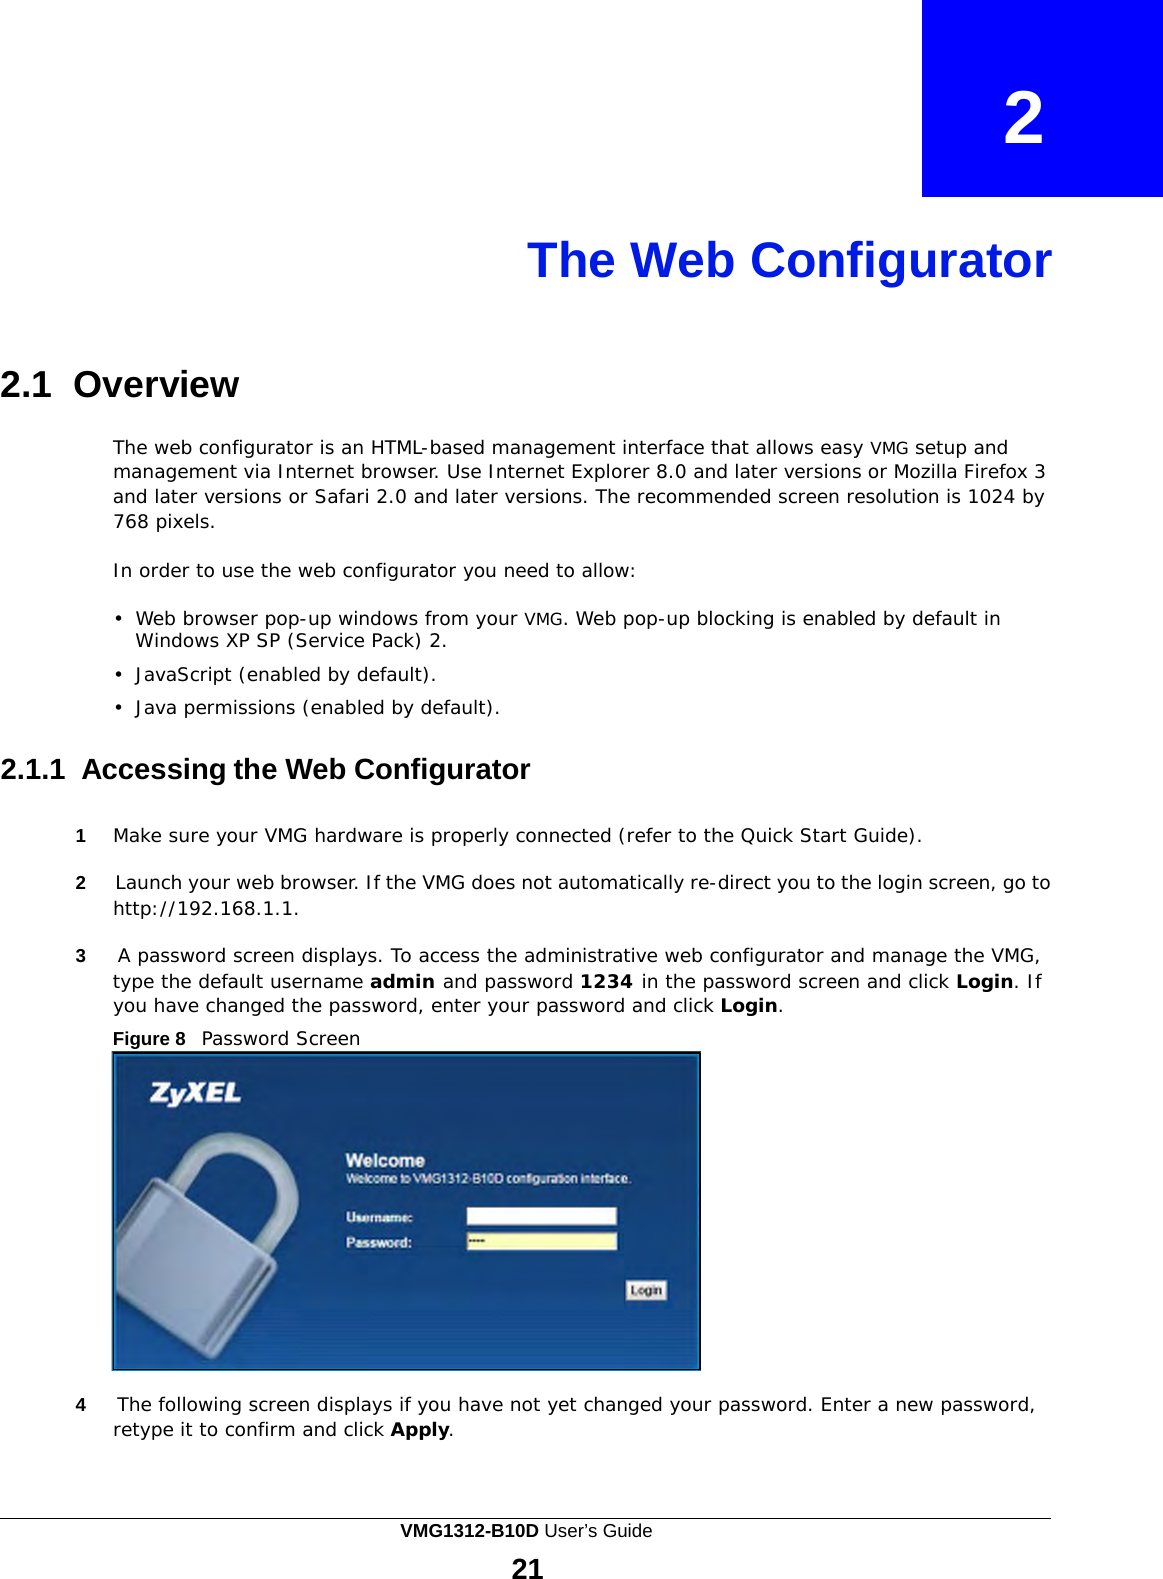    2    The Web Configurator     2.1  Overview  The web configurator is an HTML-based management interface that allows easy VMG setup and management via Internet browser. Use Internet Explorer 8.0 and later versions or Mozilla Firefox 3 and later versions or Safari 2.0 and later versions. The recommended screen resolution is 1024 by 768 pixels.  In order to use the web configurator you need to allow:  •  Web browser pop-up windows from your VMG. Web pop-up blocking is enabled by default in Windows XP SP (Service Pack) 2.  •  JavaScript (enabled by default).  •  Java permissions (enabled by default).   2.1.1 Accessing the Web Configurator   1  Make sure your VMG hardware is properly connected (refer to the Quick Start Guide).  2     Launch your web browser. If the VMG does not automatically re-direct you to the login screen, go to http://192.168.1.1.  3     A password screen displays. To access the administrative web configurator and manage the VMG, type the default username admin and password 1234 in the password screen and click Login. If you have changed the password, enter your password and click Login. Figure 8   Password Screen                 4     The following screen displays if you have not yet changed your password. Enter a new password, retype it to confirm and click Apply. VMG1312-B10D User’s Guide 21  